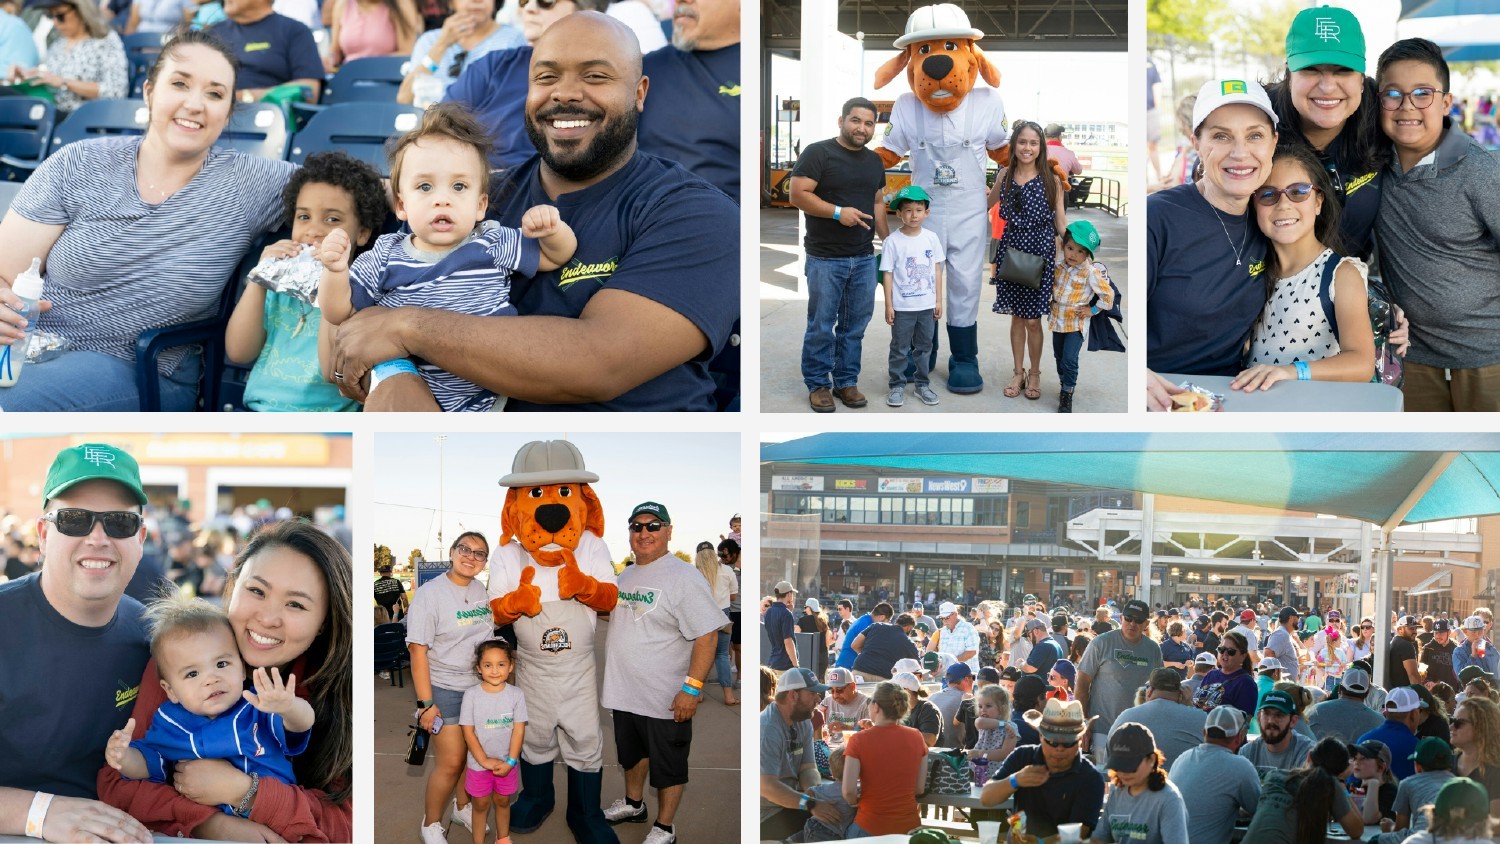 At Night at the Rockhounds, our highest-attended event, the Endeavor family gathers to enjoy ballpark festivities.